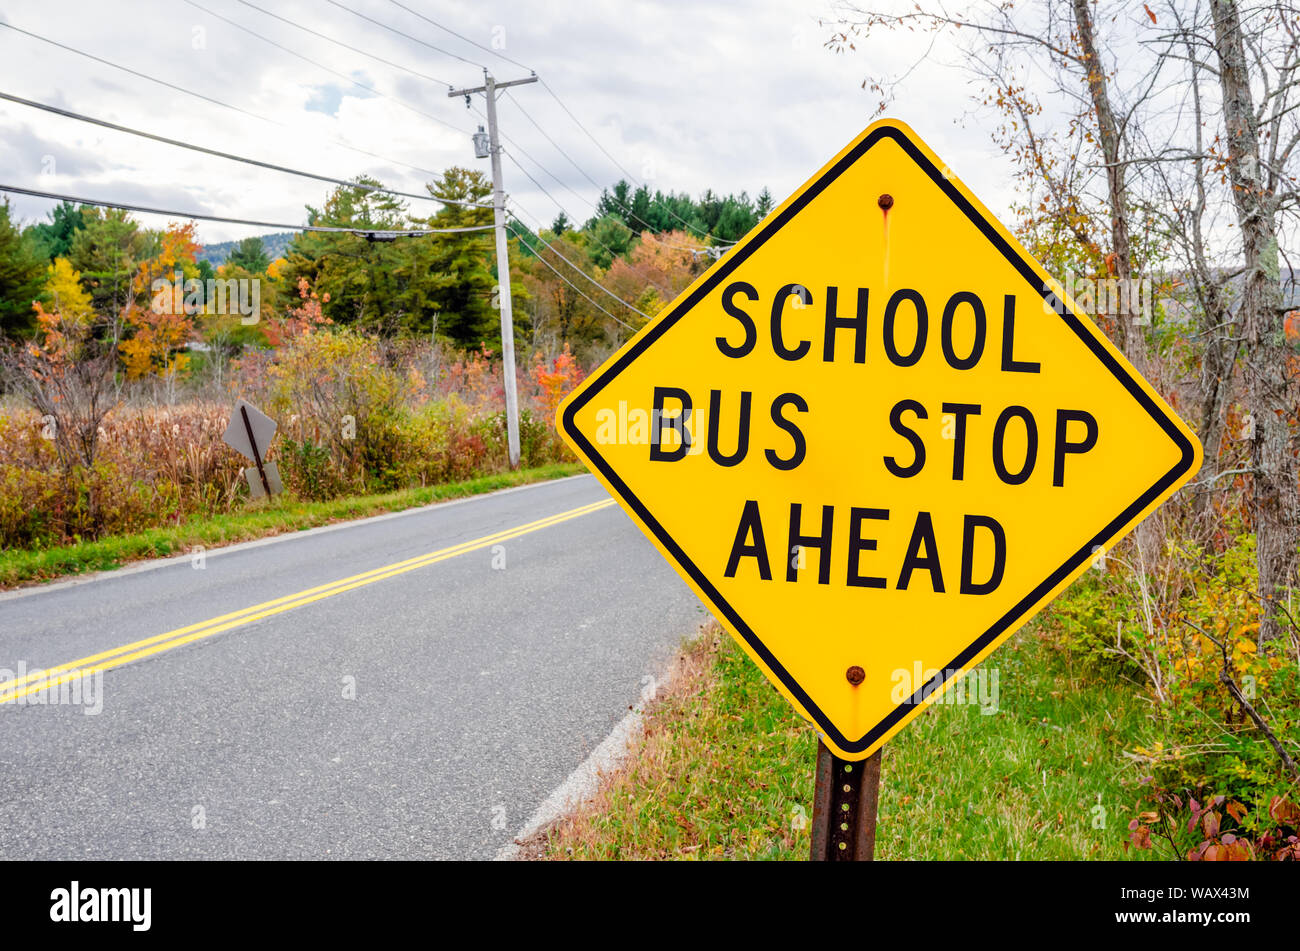 School bus stop ahead Warning road sign on a cloudy autumn day. Back to school concept. Stock Photo